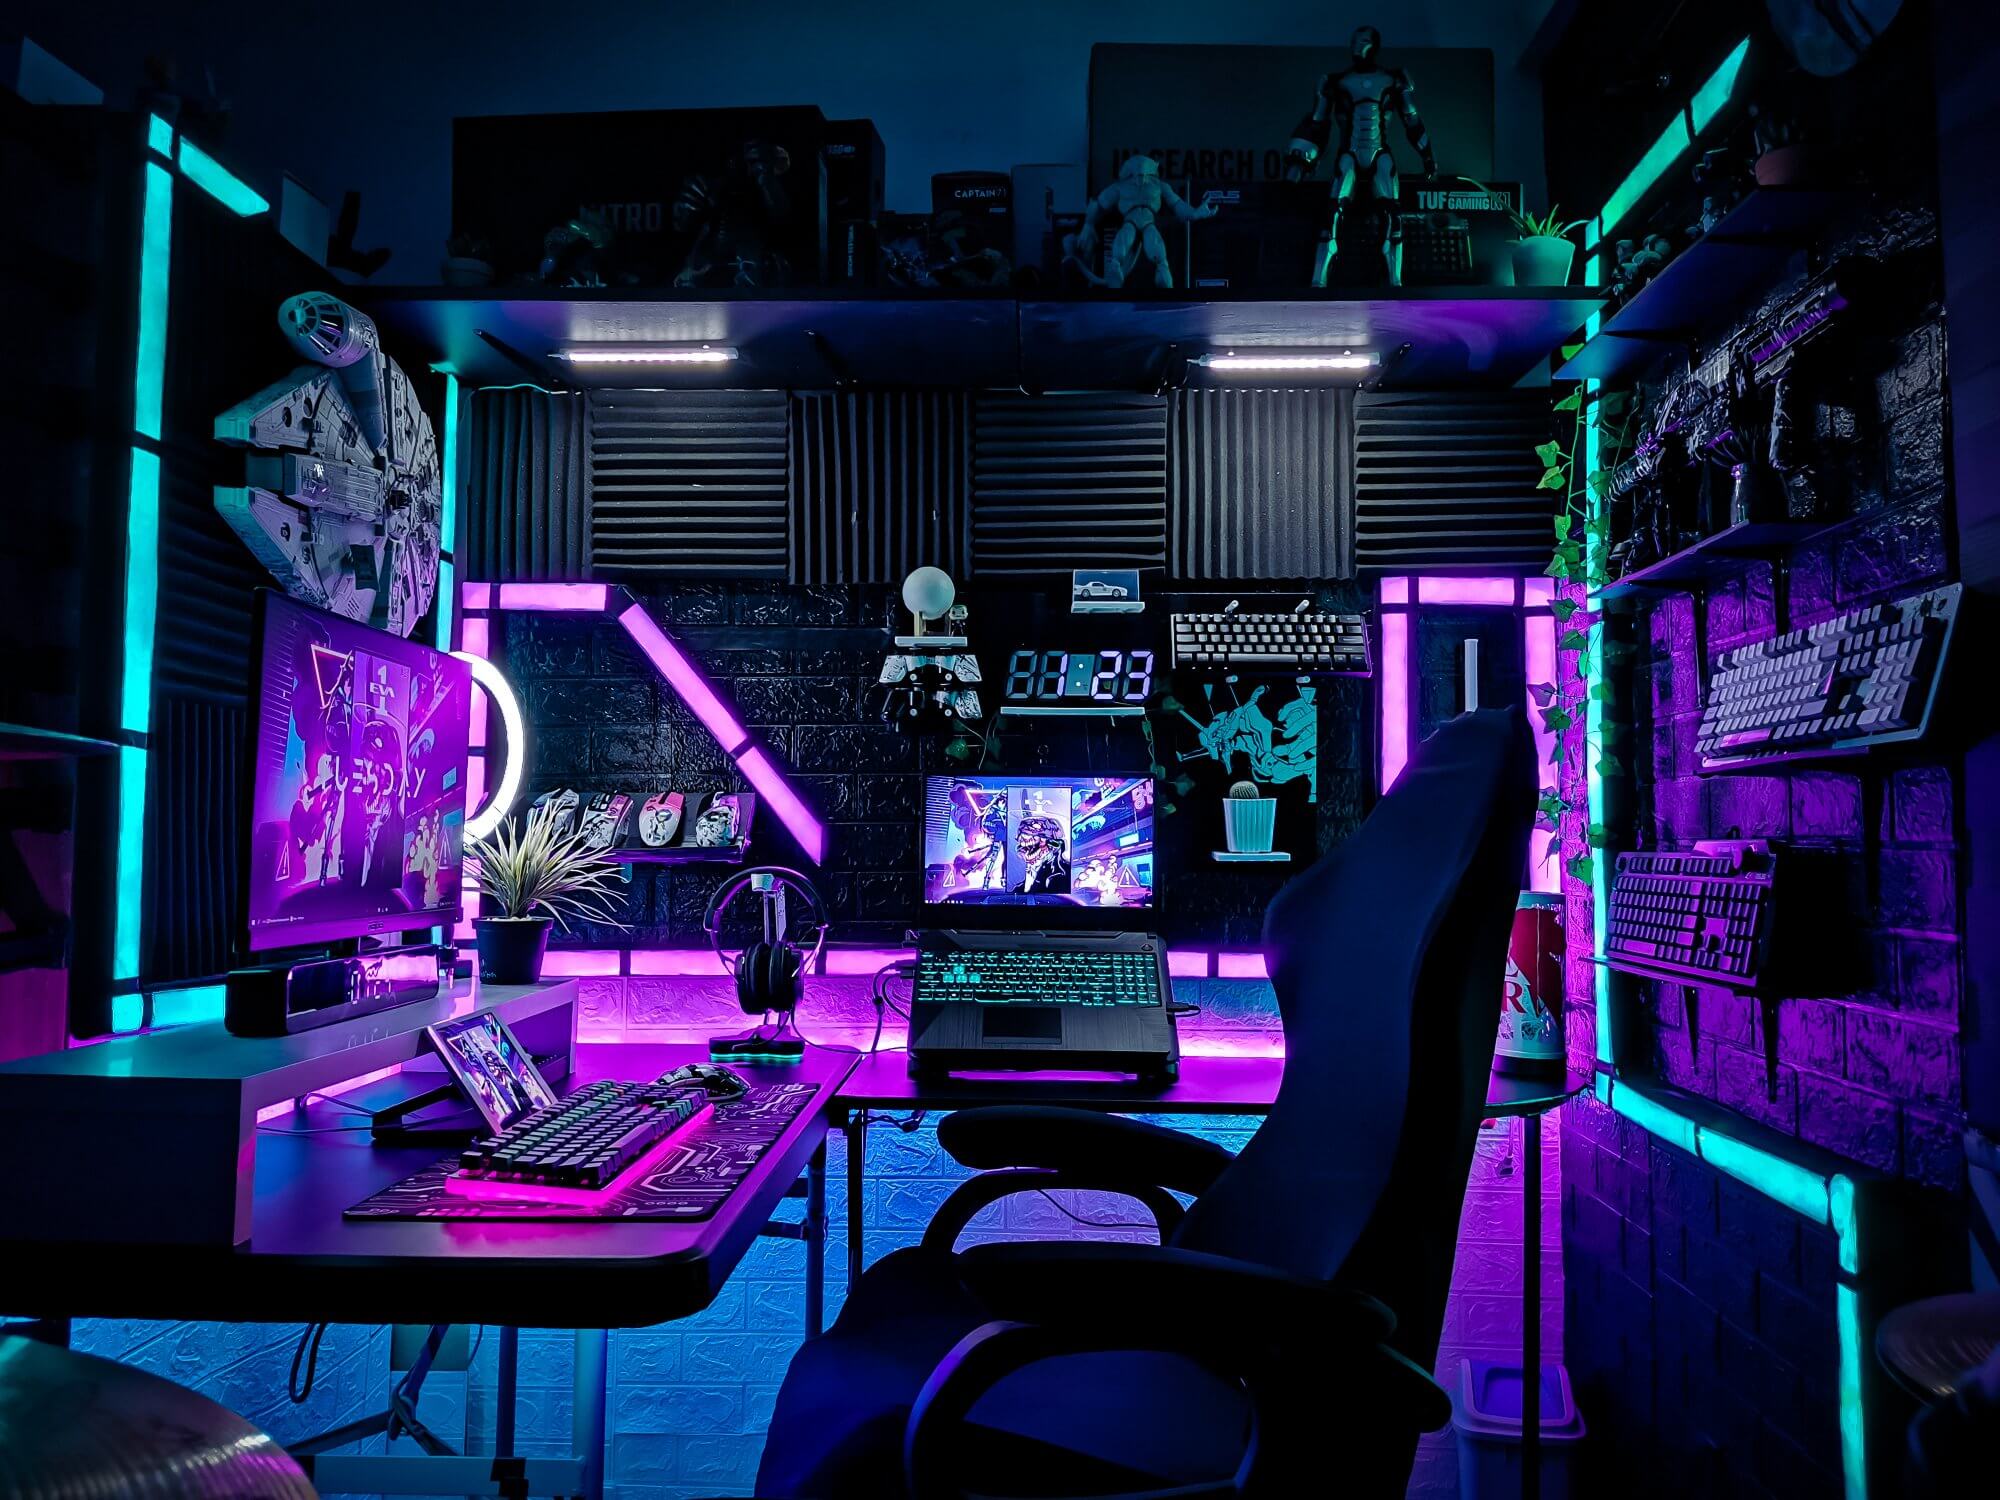 Gerwyn’s Cyberpunk-Inspired Gaming Setup in the Philippines